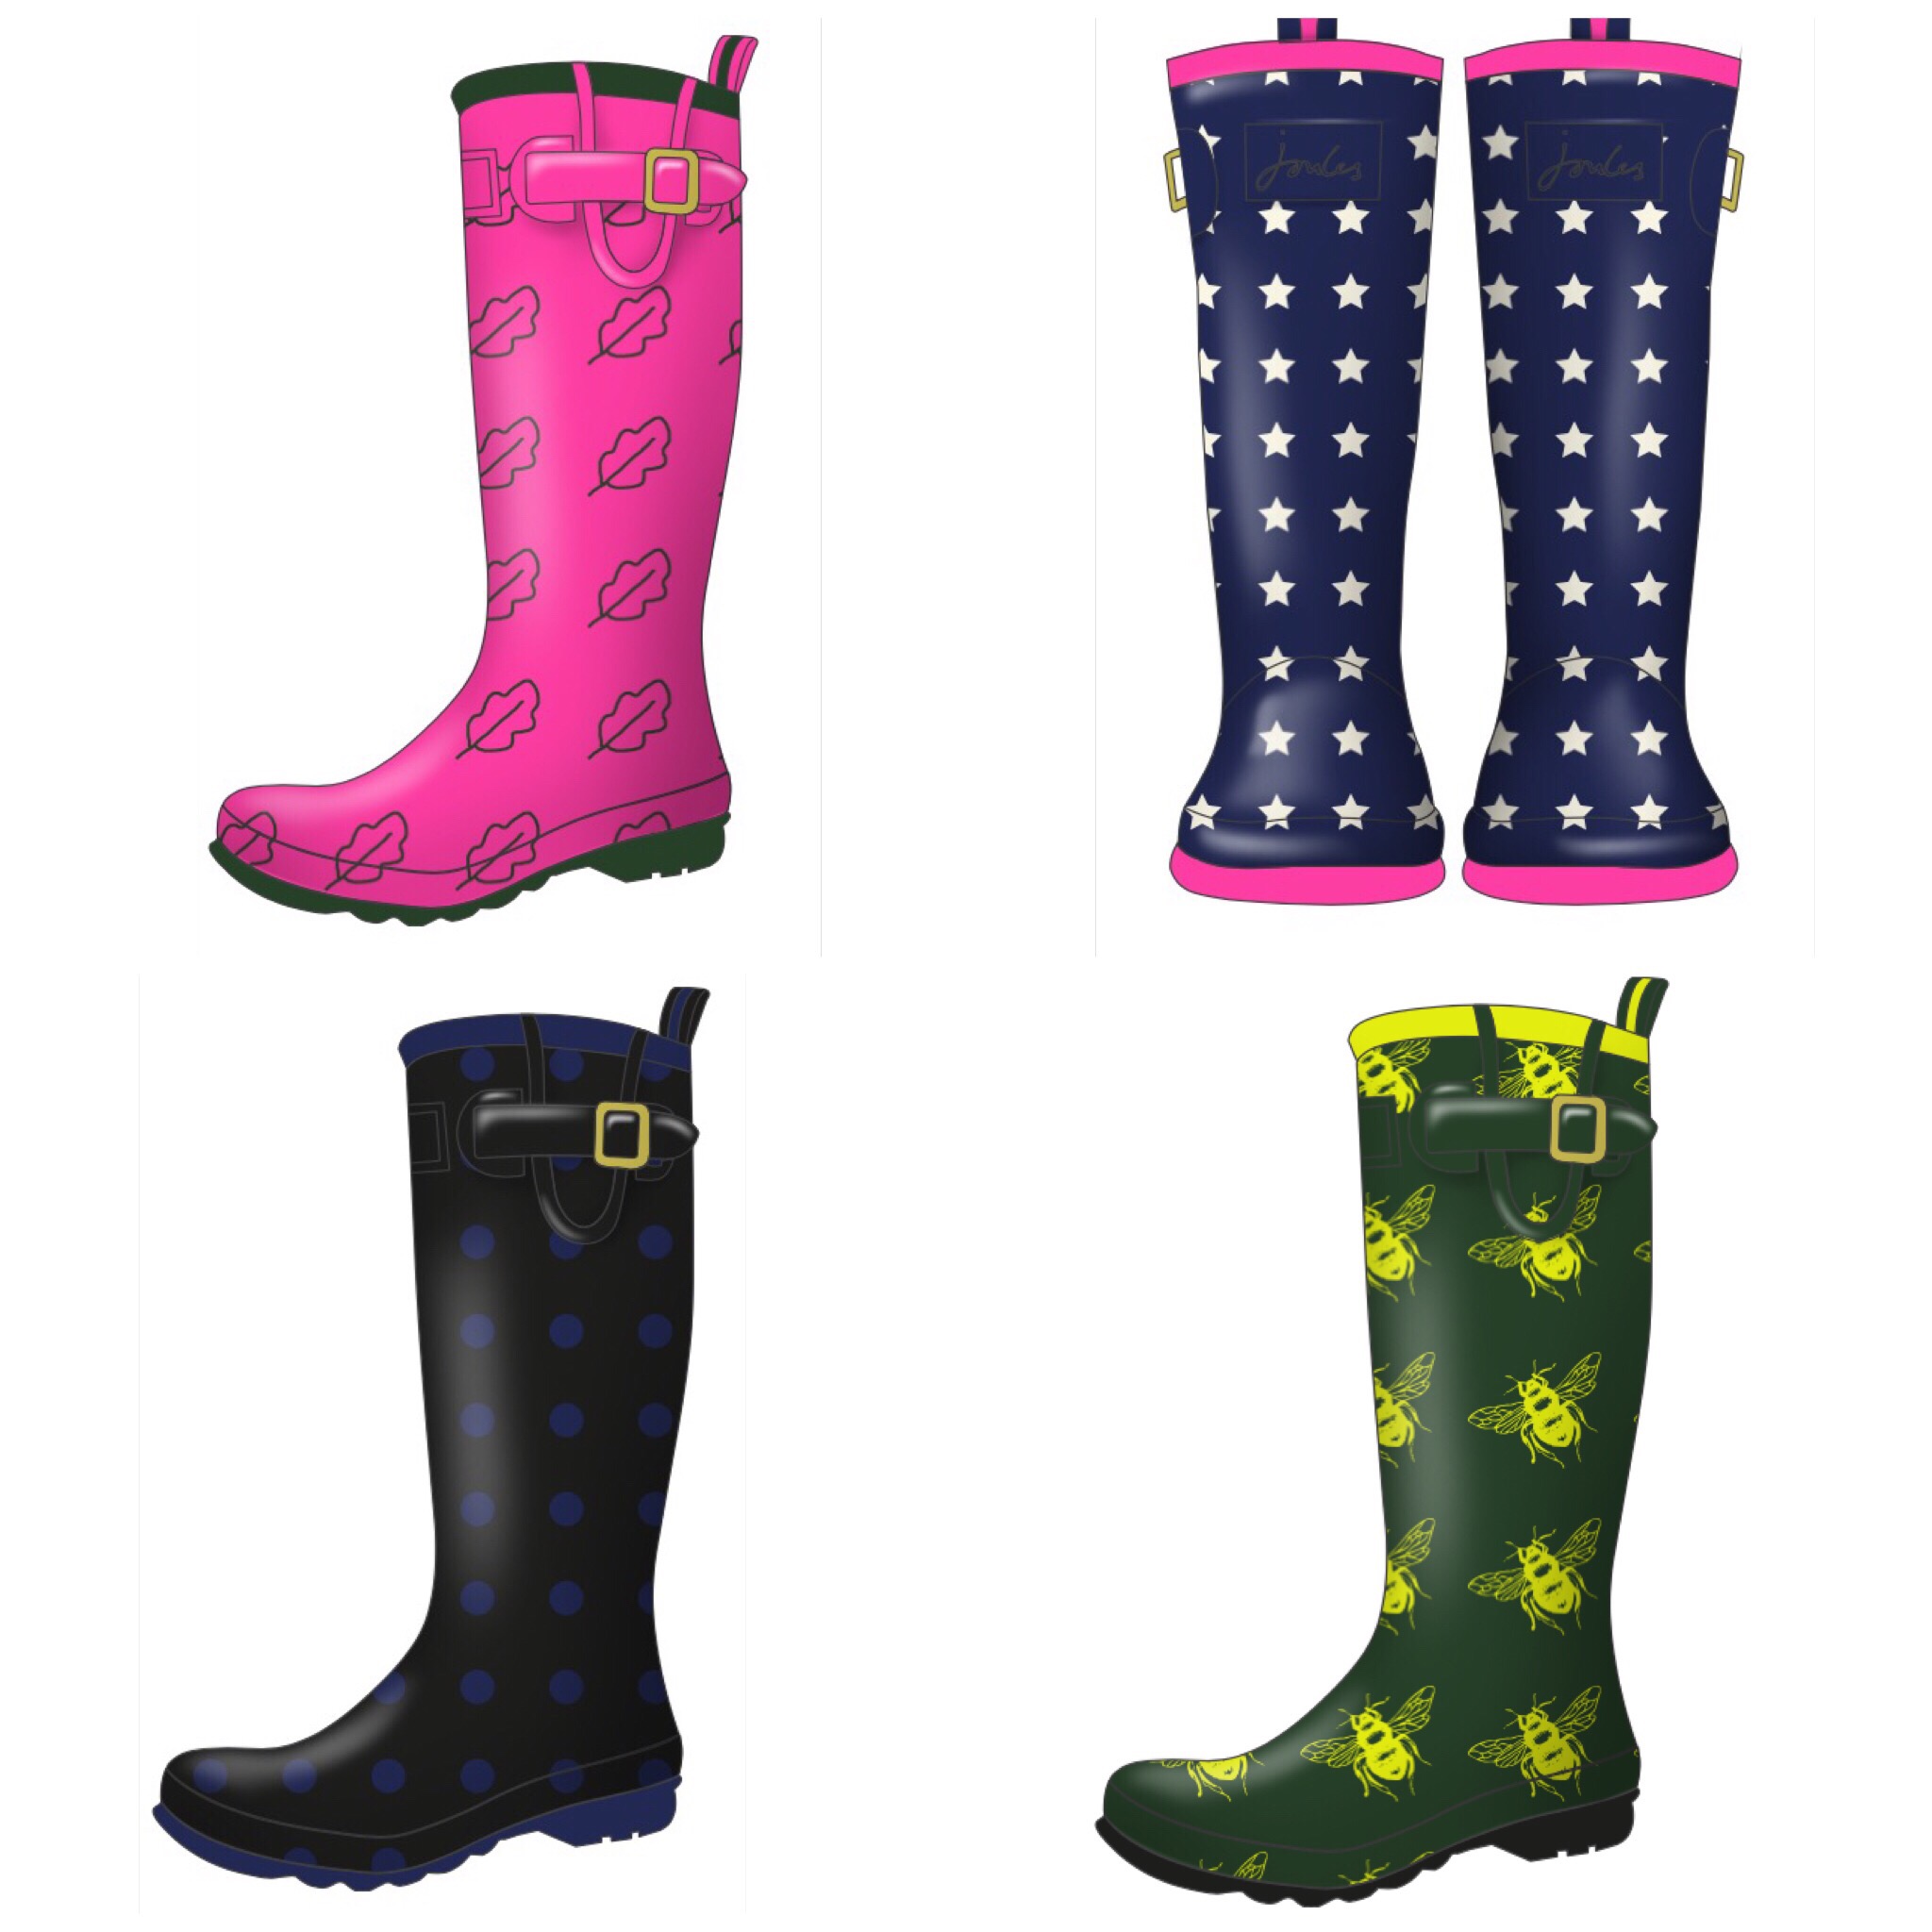 Joules wellies | competition | design your own | cocomamastyle